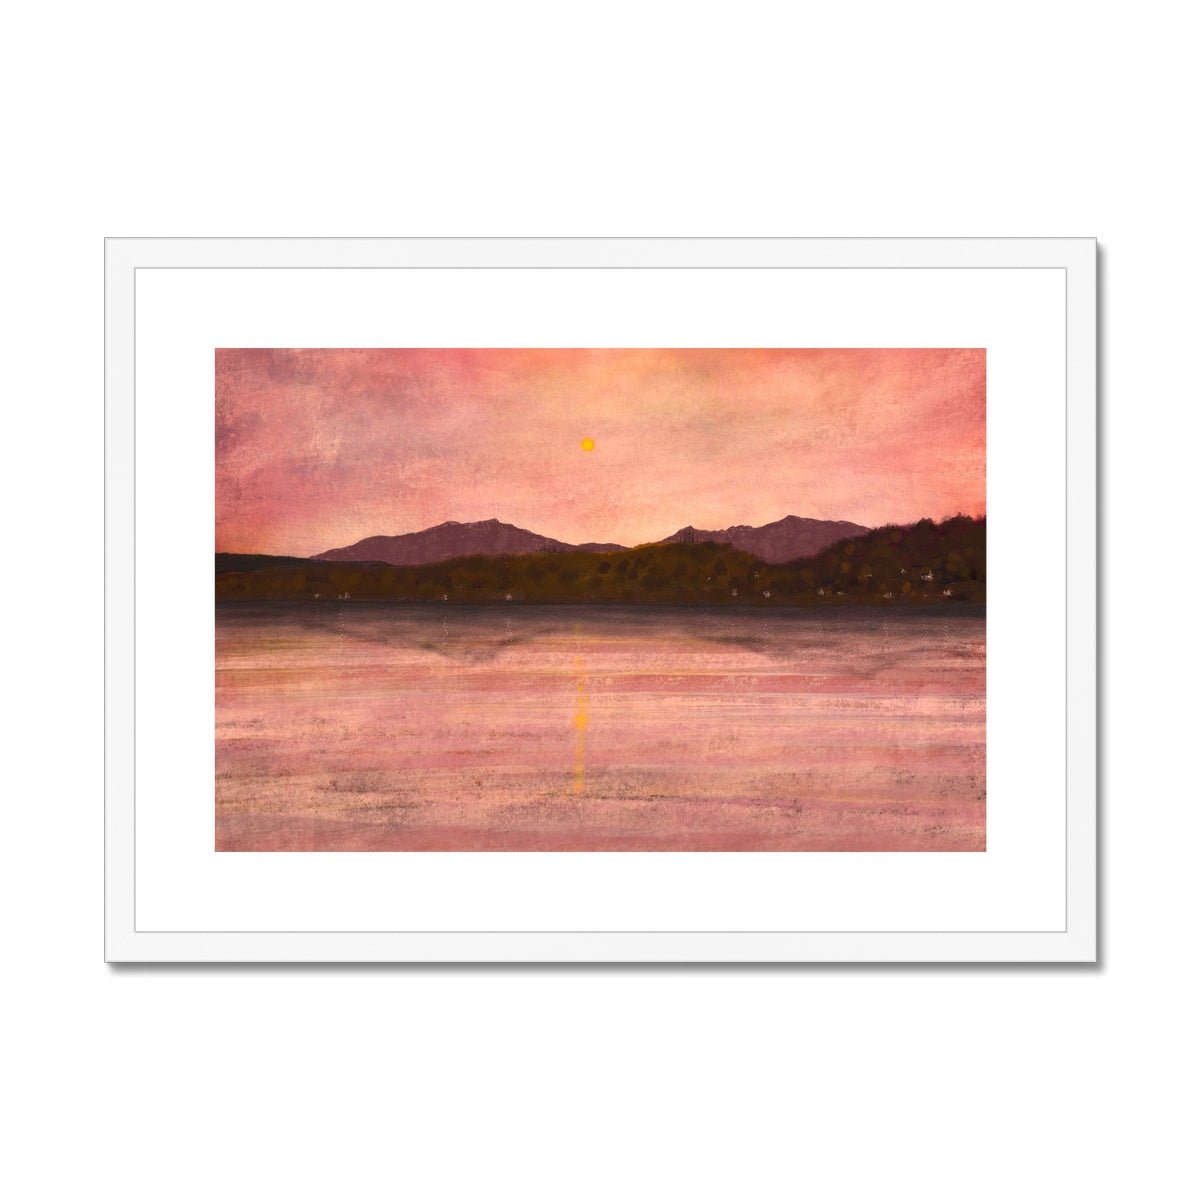 Dusk Over Arran & Bute Painting | Framed & Mounted Prints From Scotland-Framed & Mounted Prints-Arran Art Gallery-A2 Landscape-White Frame-Paintings, Prints, Homeware, Art Gifts From Scotland By Scottish Artist Kevin Hunter